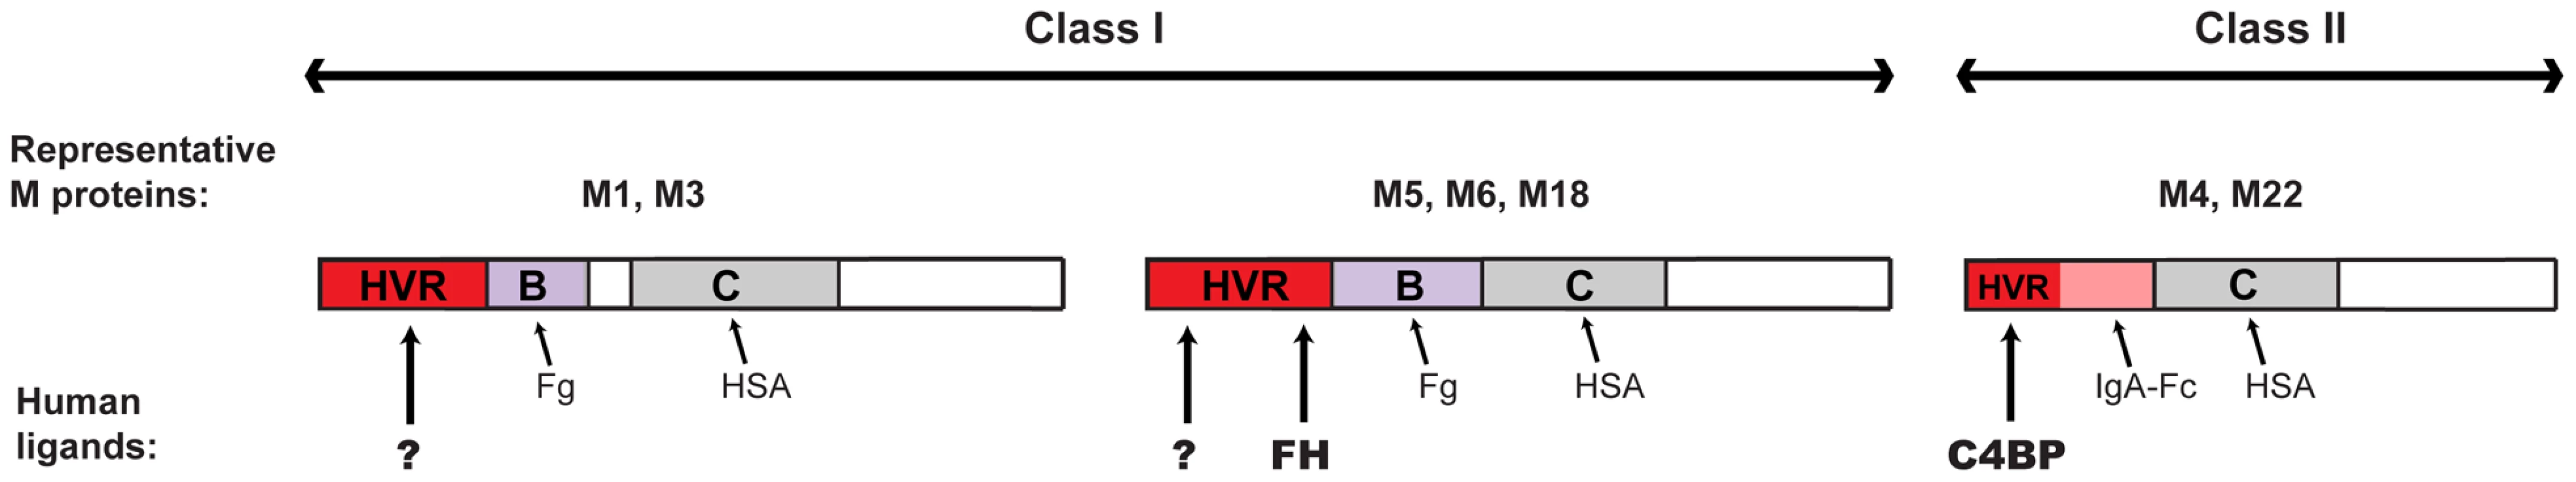 Binding of human proteins to M proteins, with focus on the HVR.